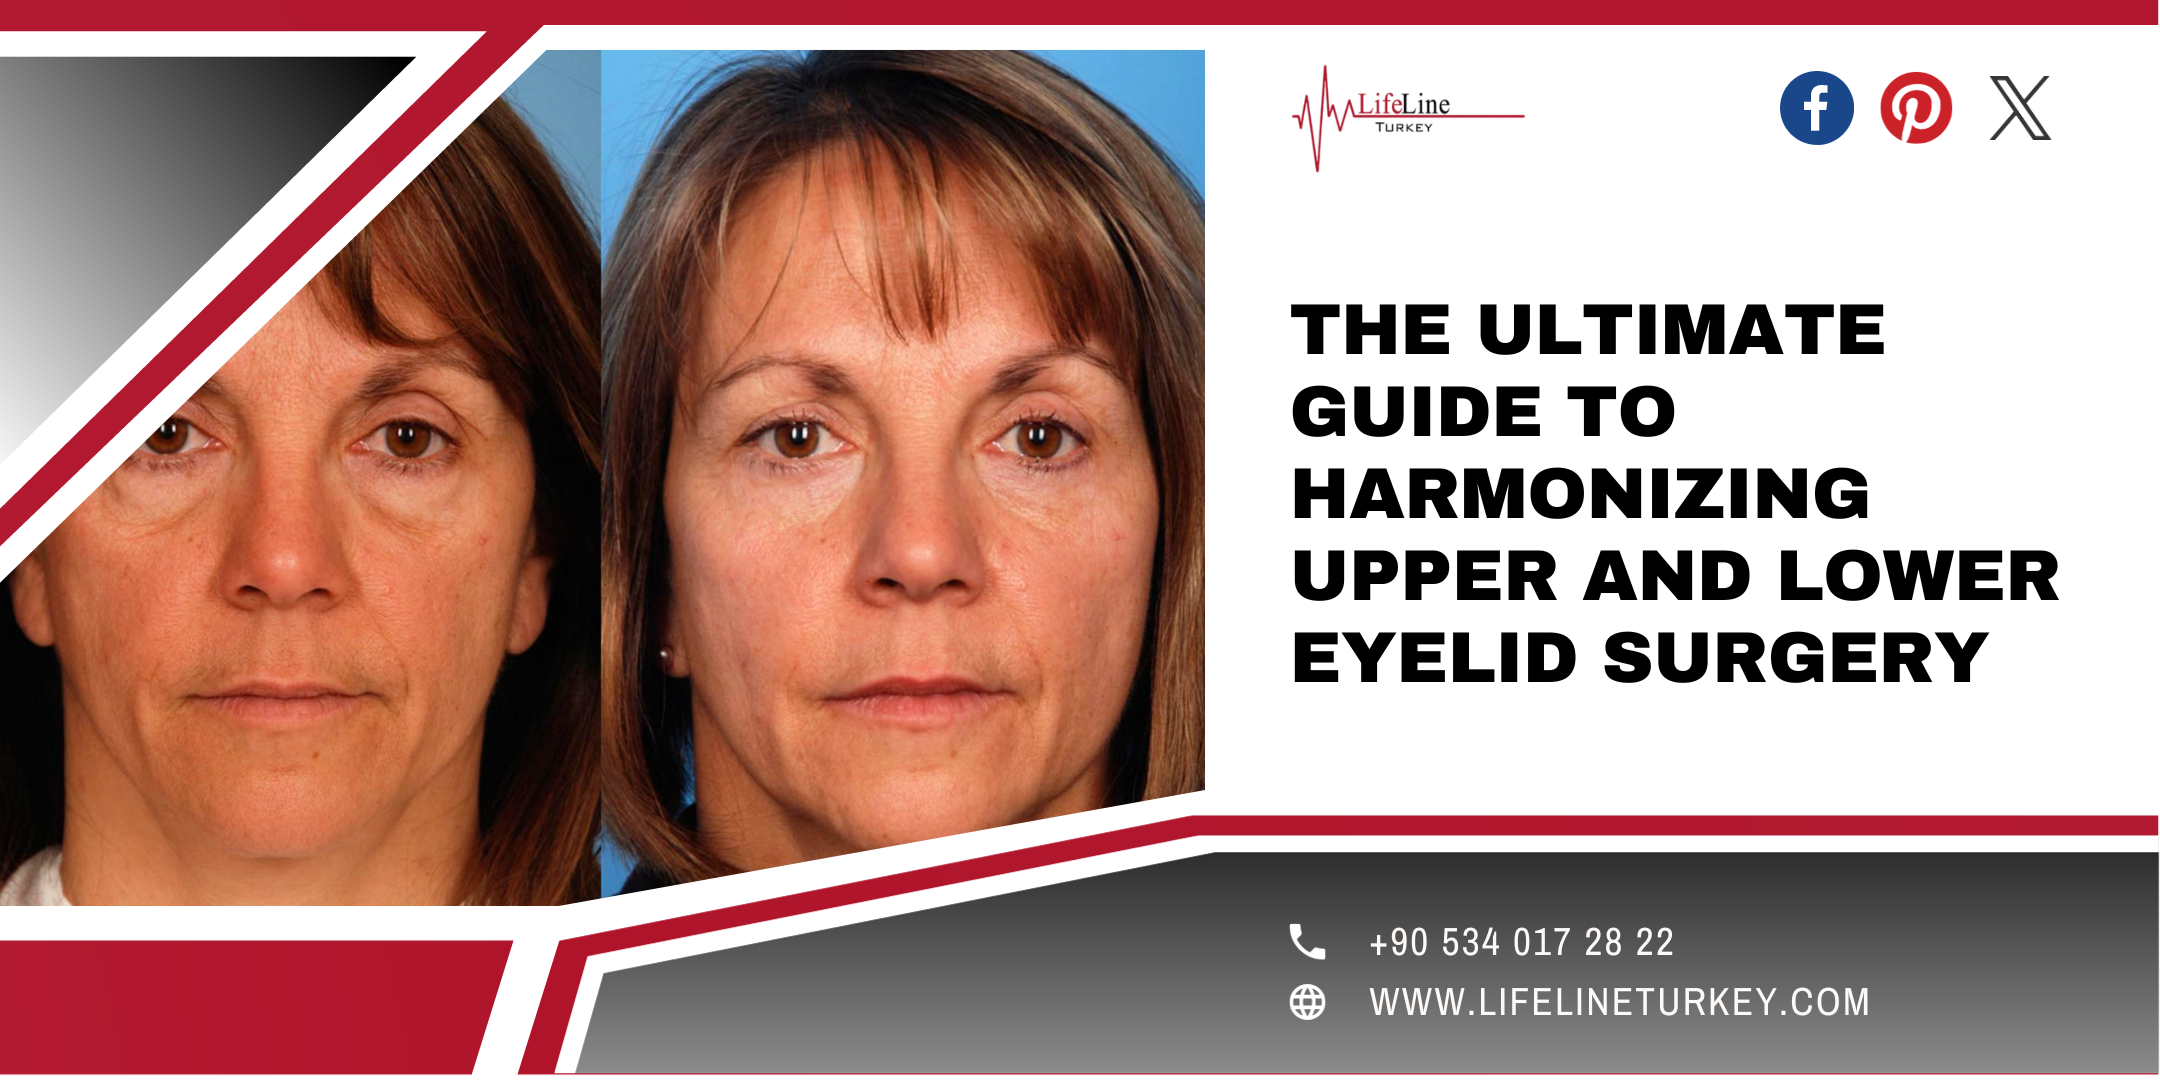 The Ultimate Guide to Harmonizing Upper and Lower Eyelid Surgery